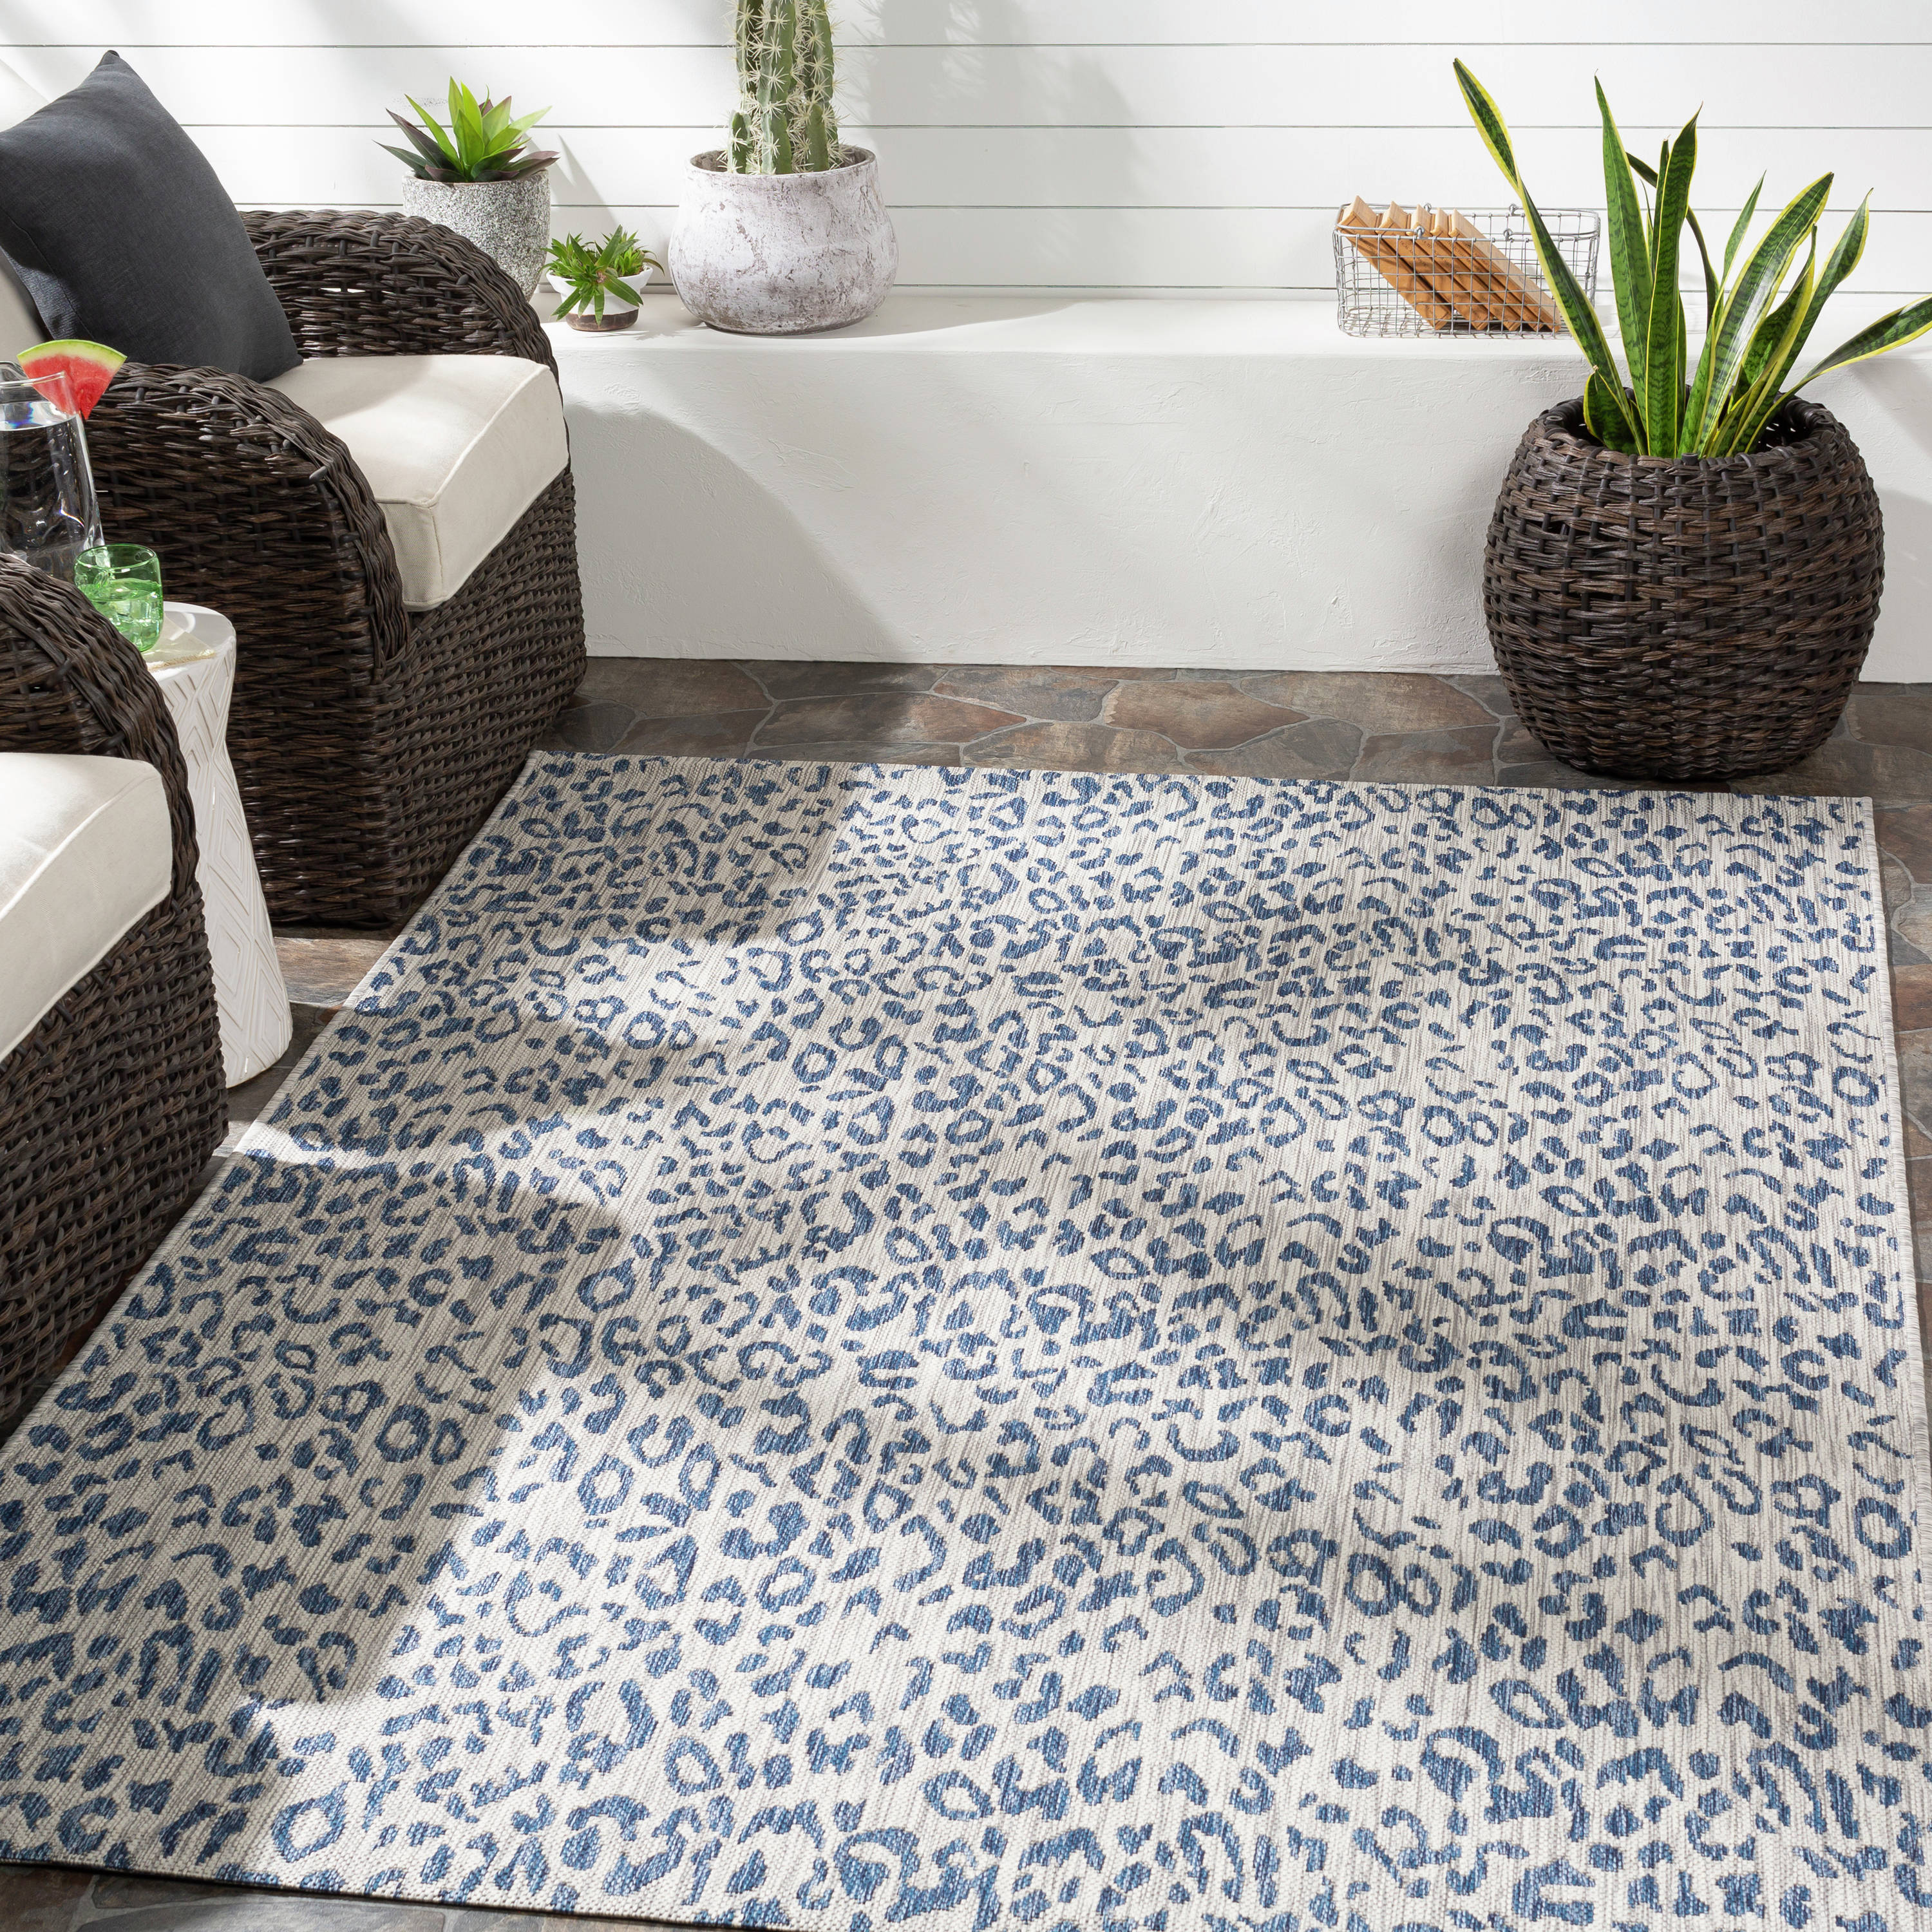 New Modern Animal Print Living Room Area Rug with Nonslip Backing, 